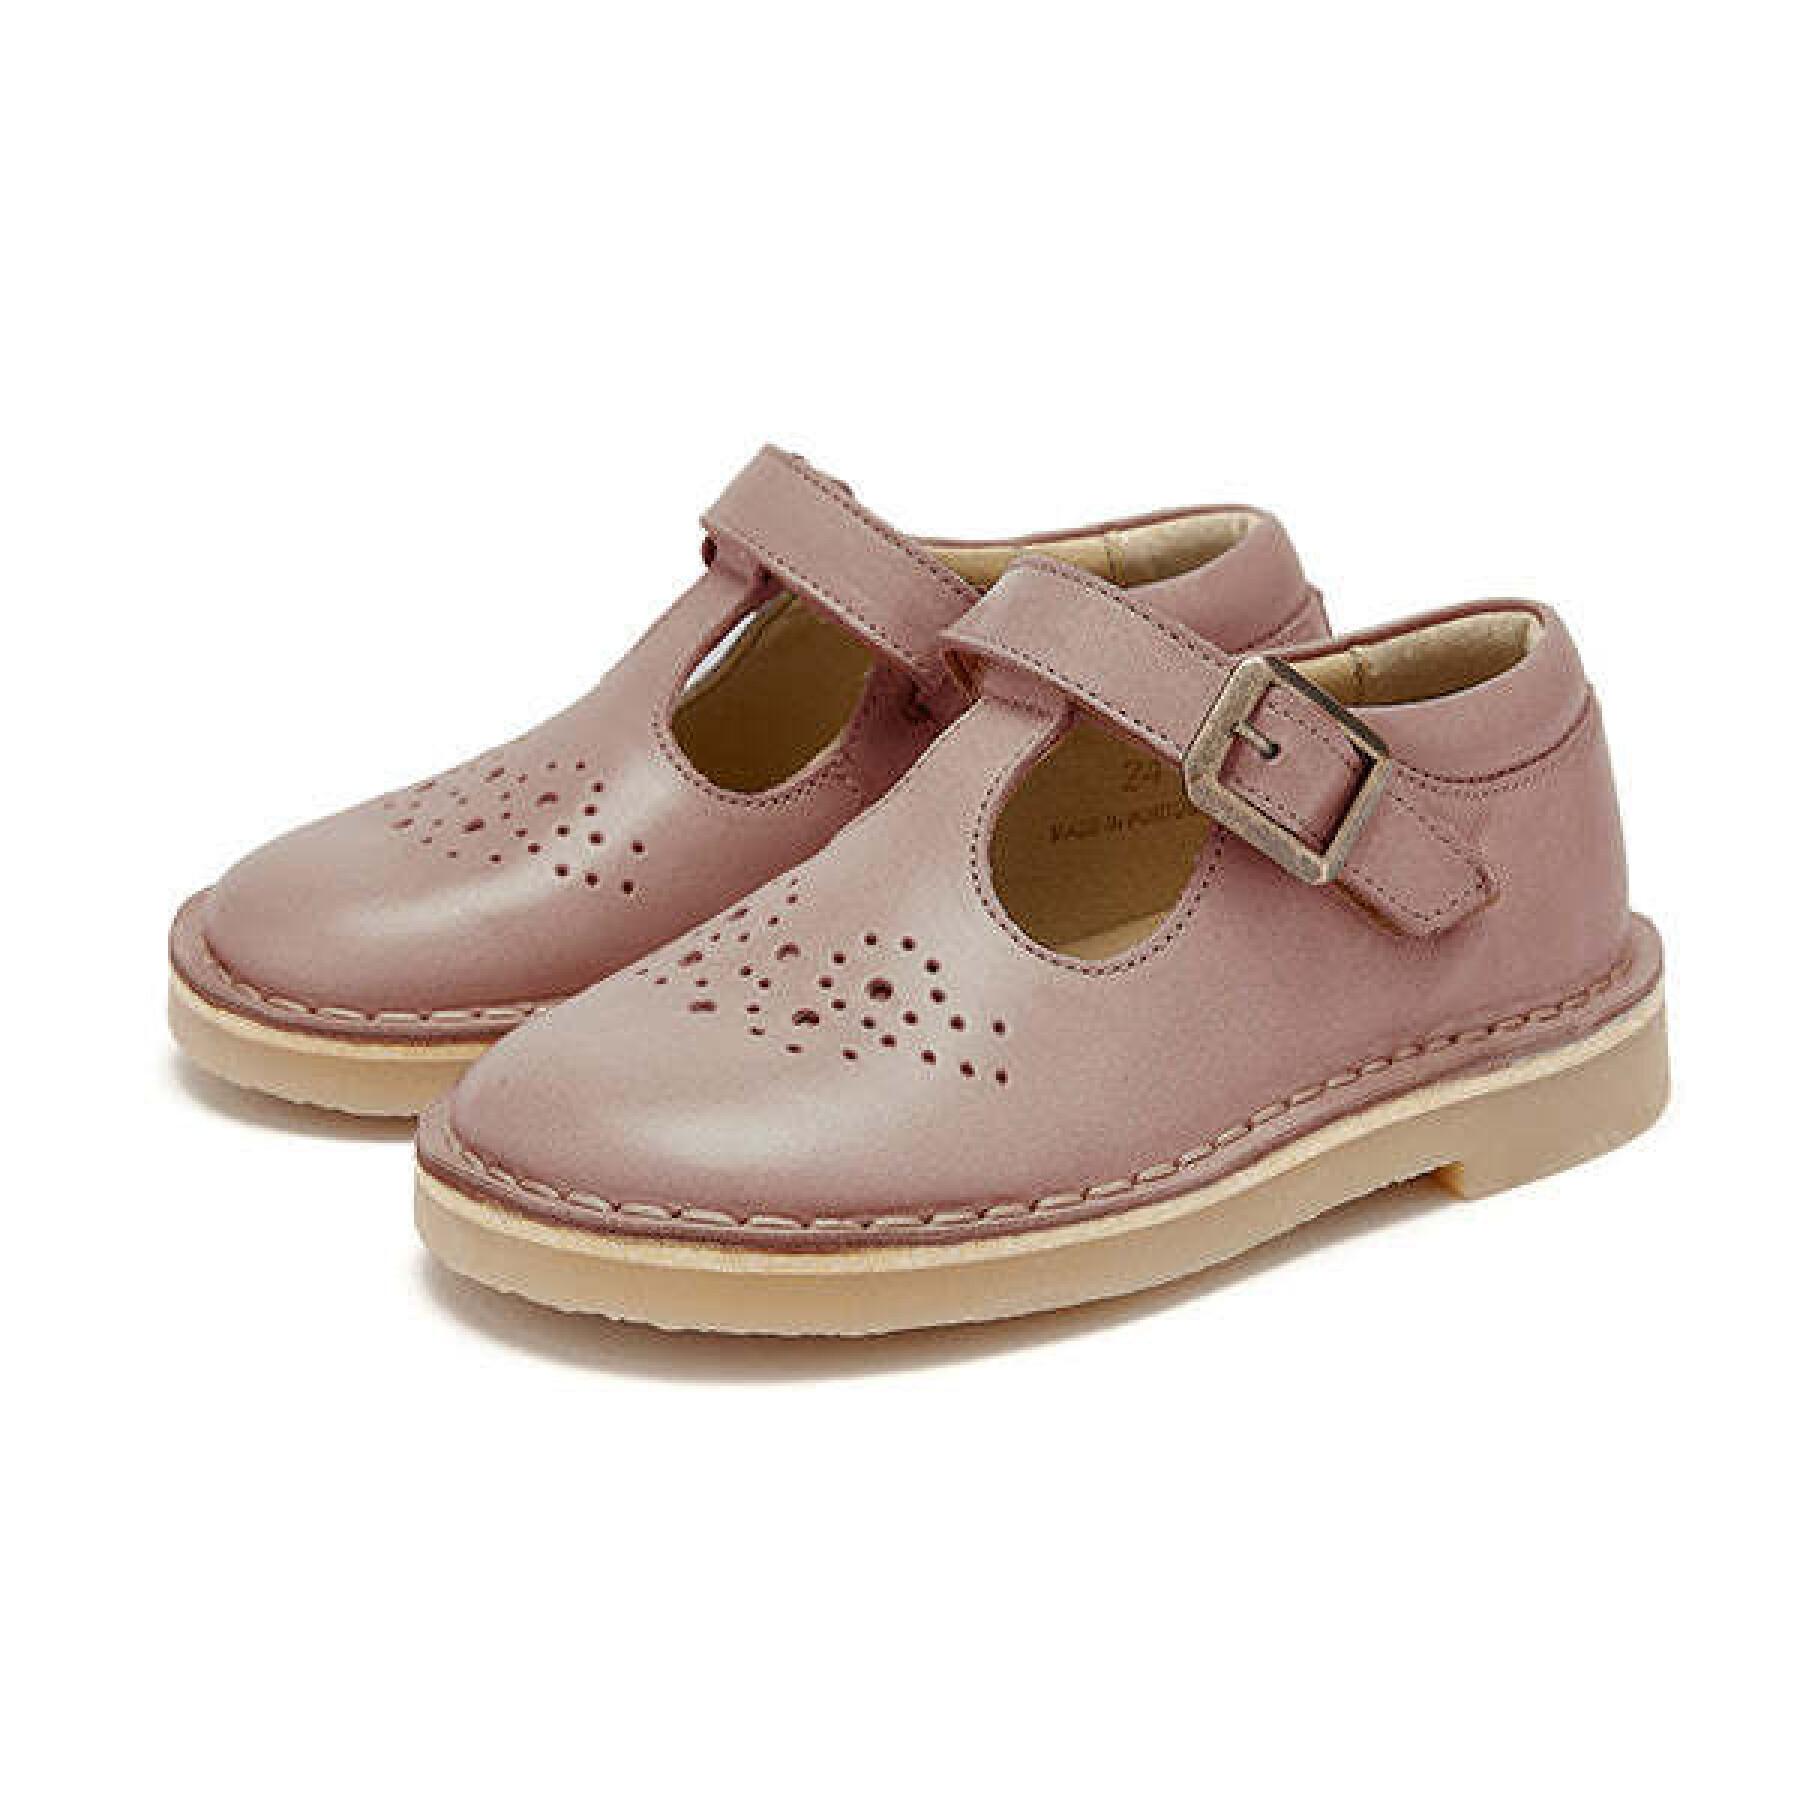 Ballerine in pelle per bambine Young Soles Penny